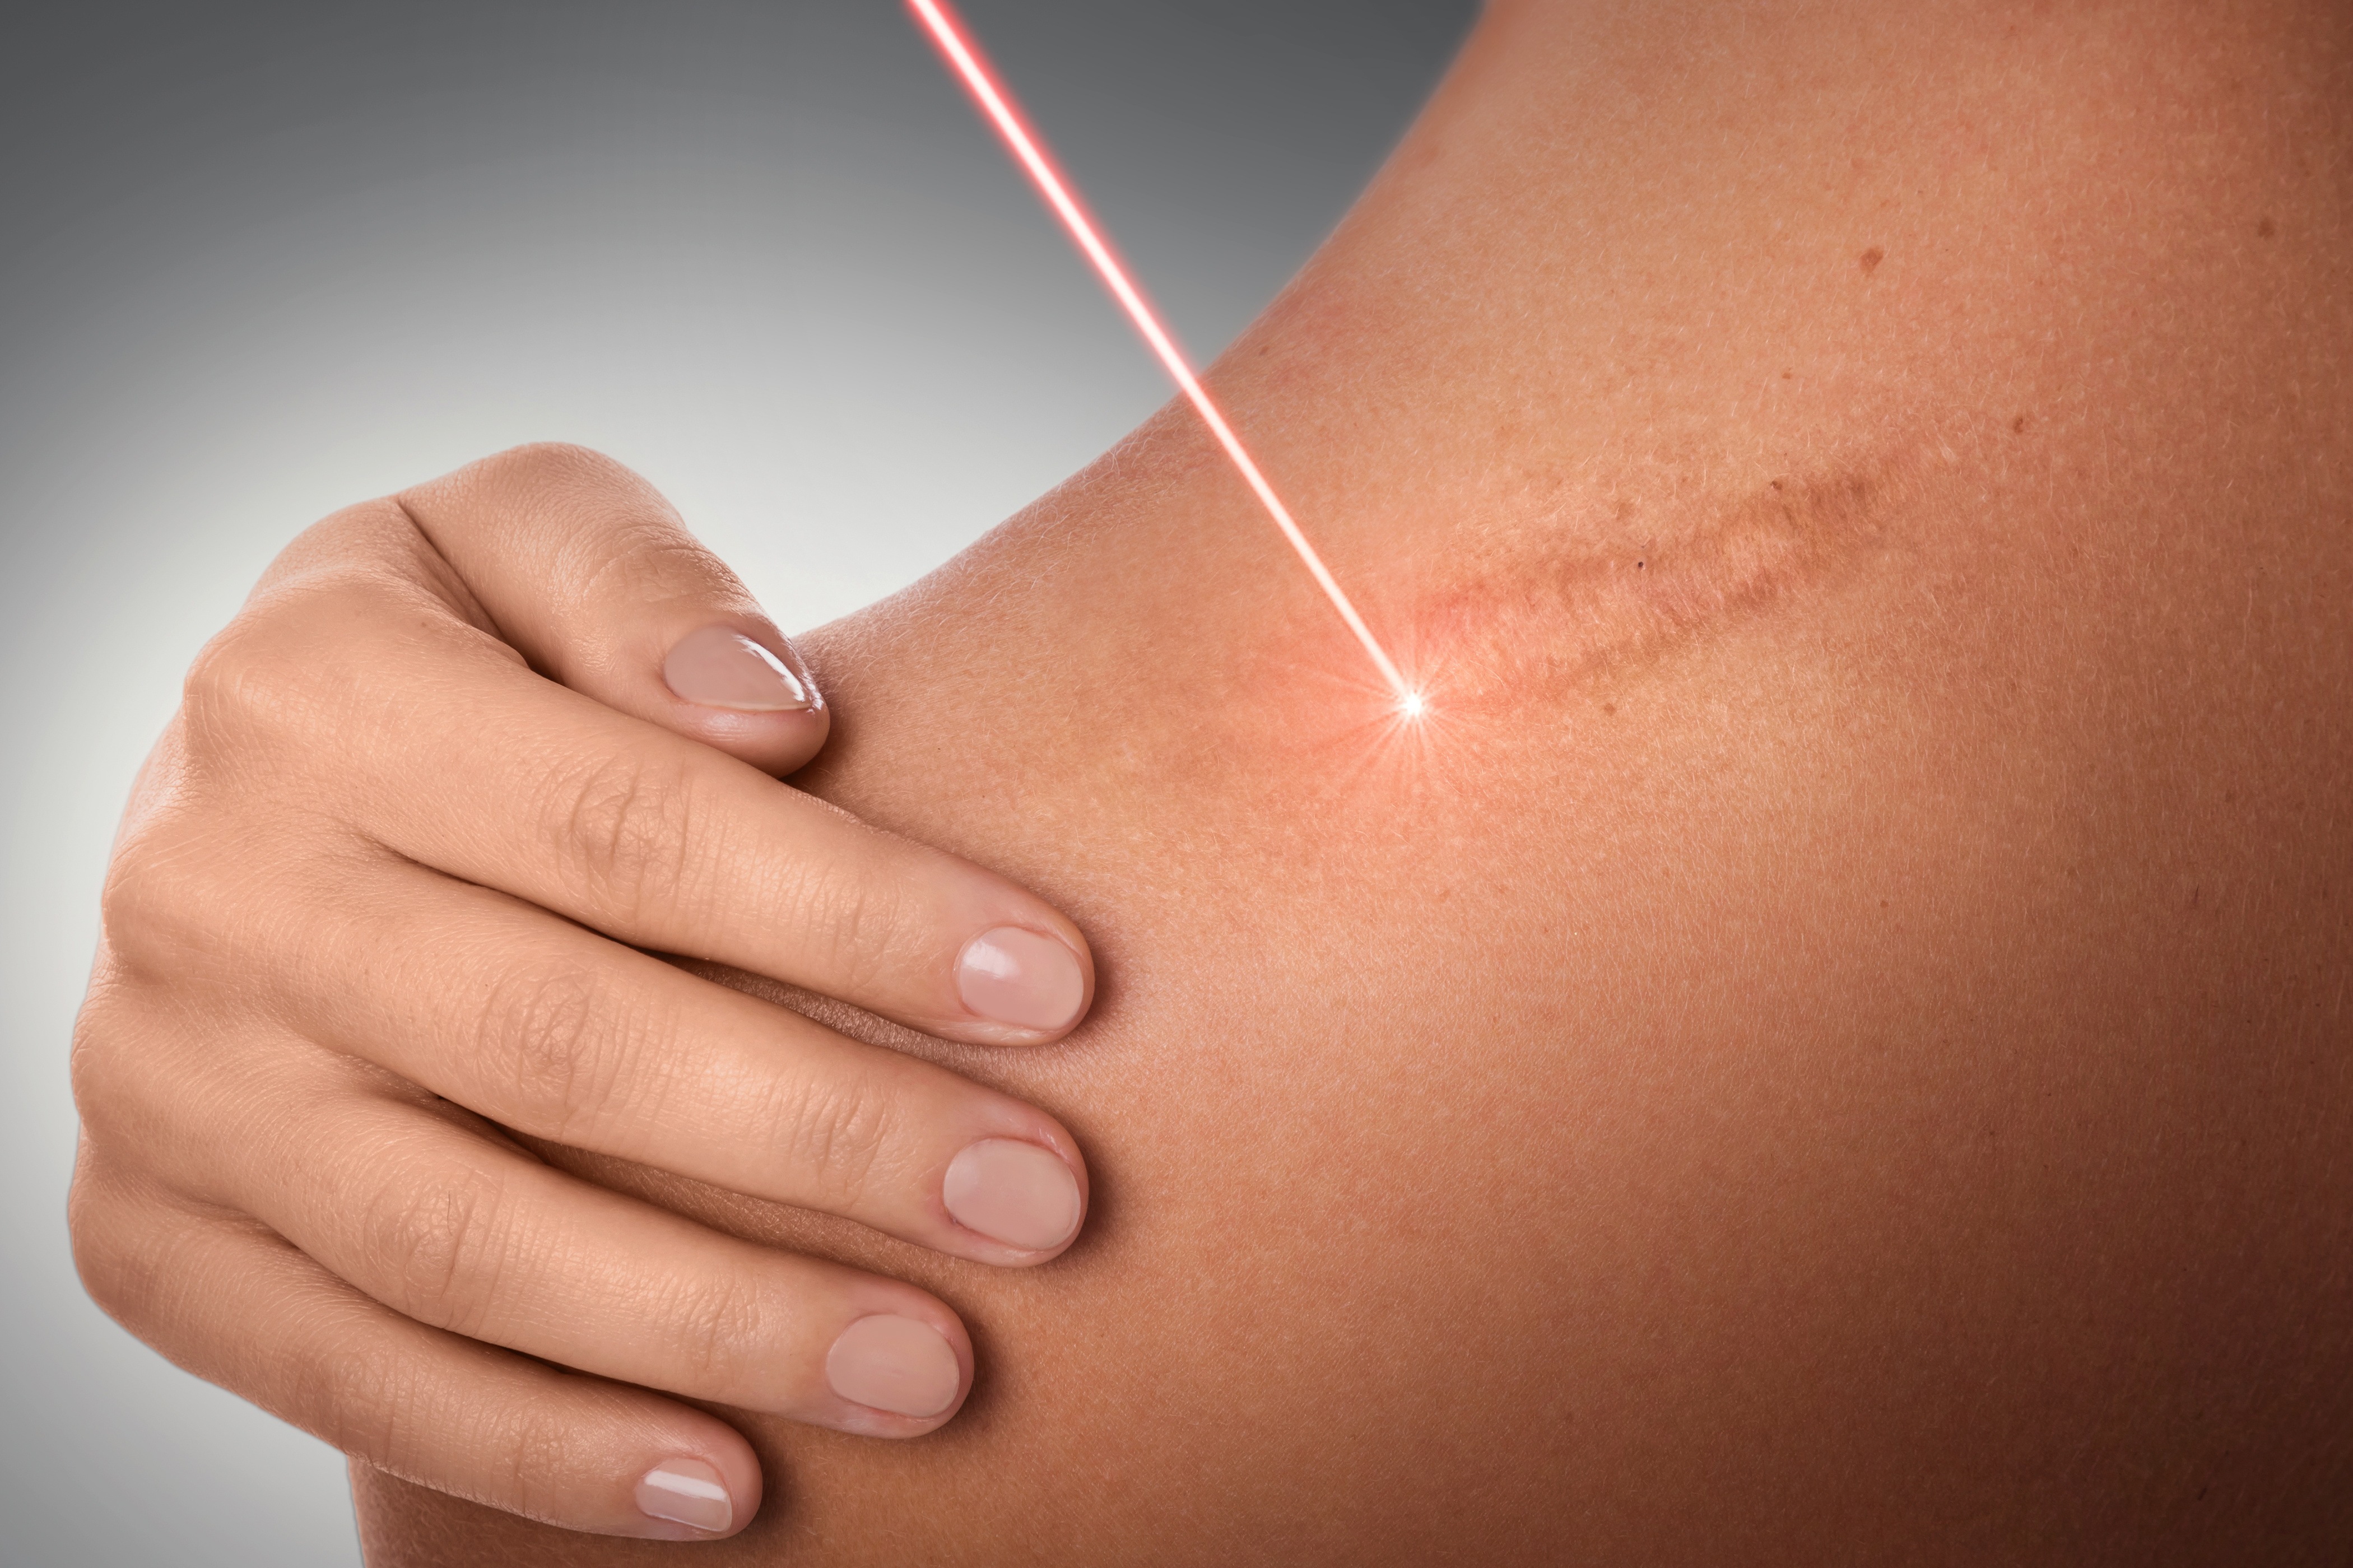 Types of Scars and Laser Skin Treatments and More Treatment Options